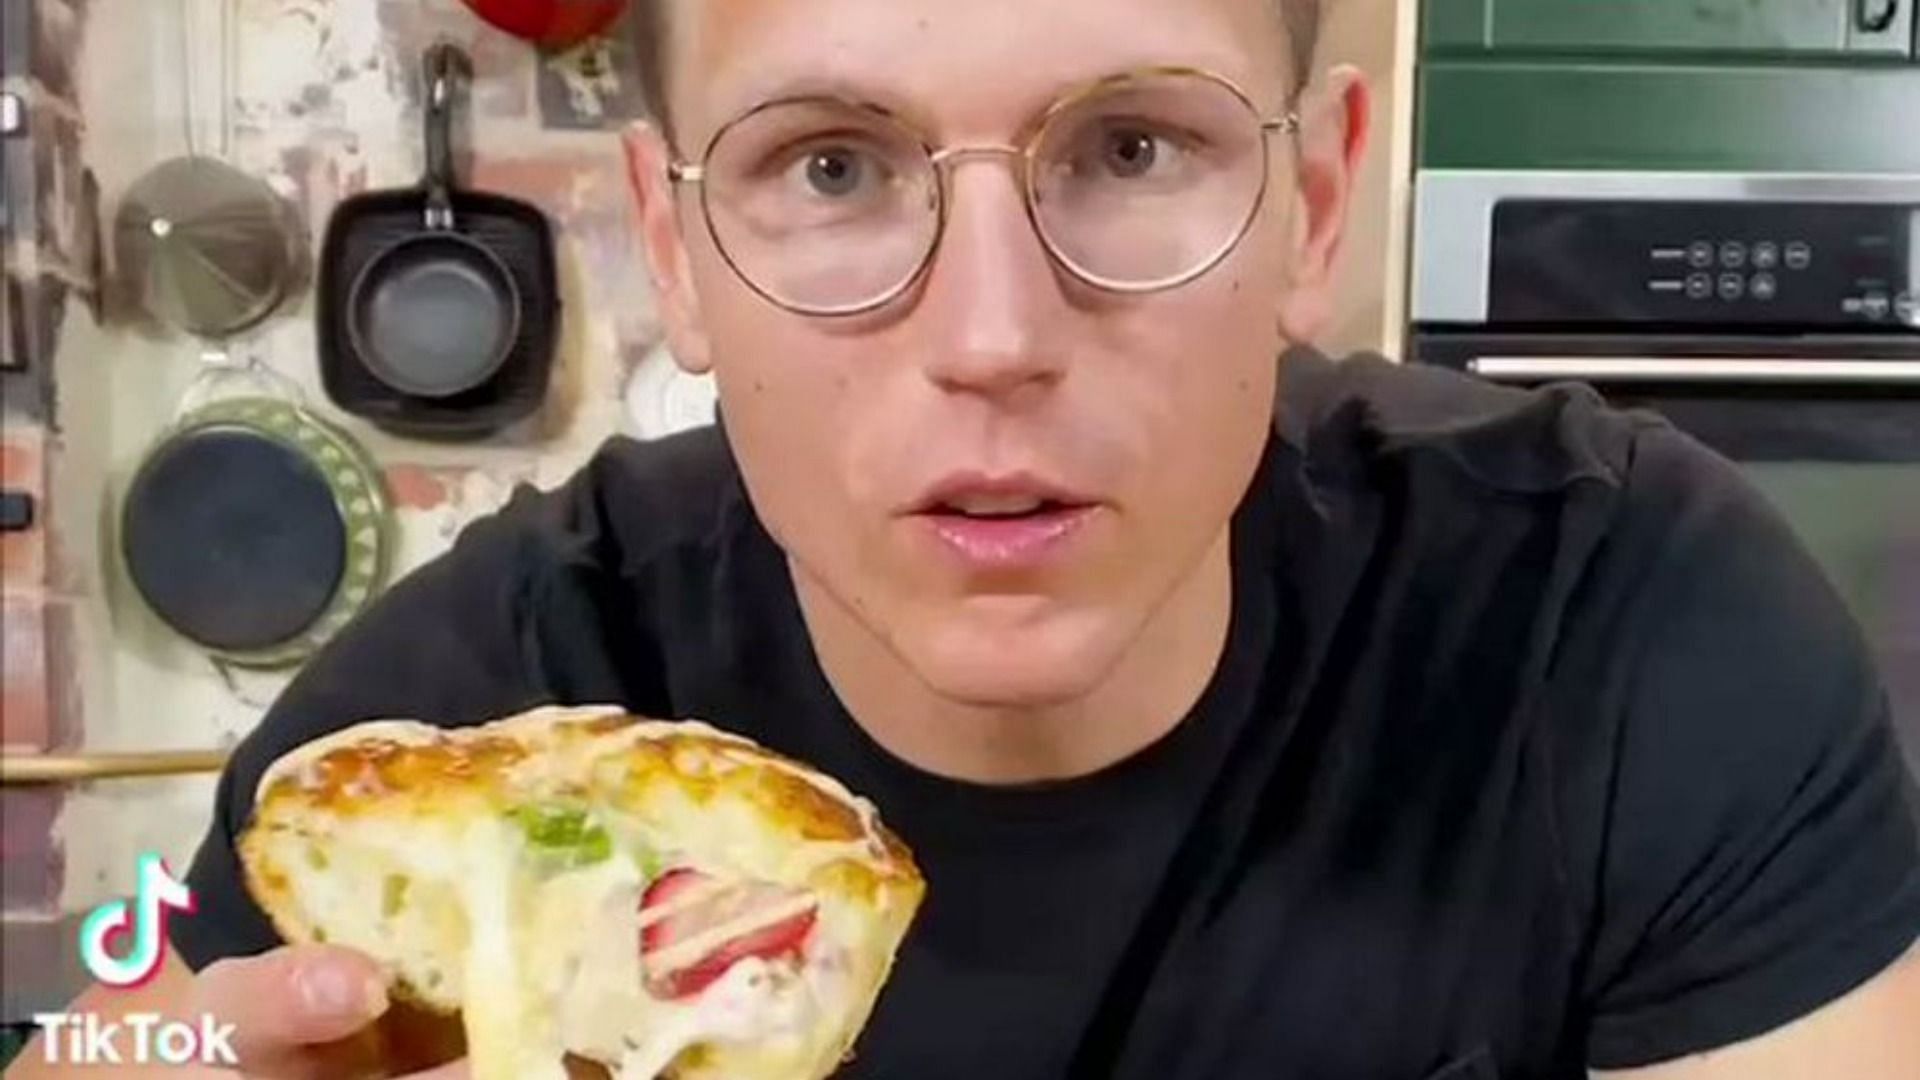 Chef goes viral for putting strawberries on pizza (Image via mythicalkitchen/TikTok)